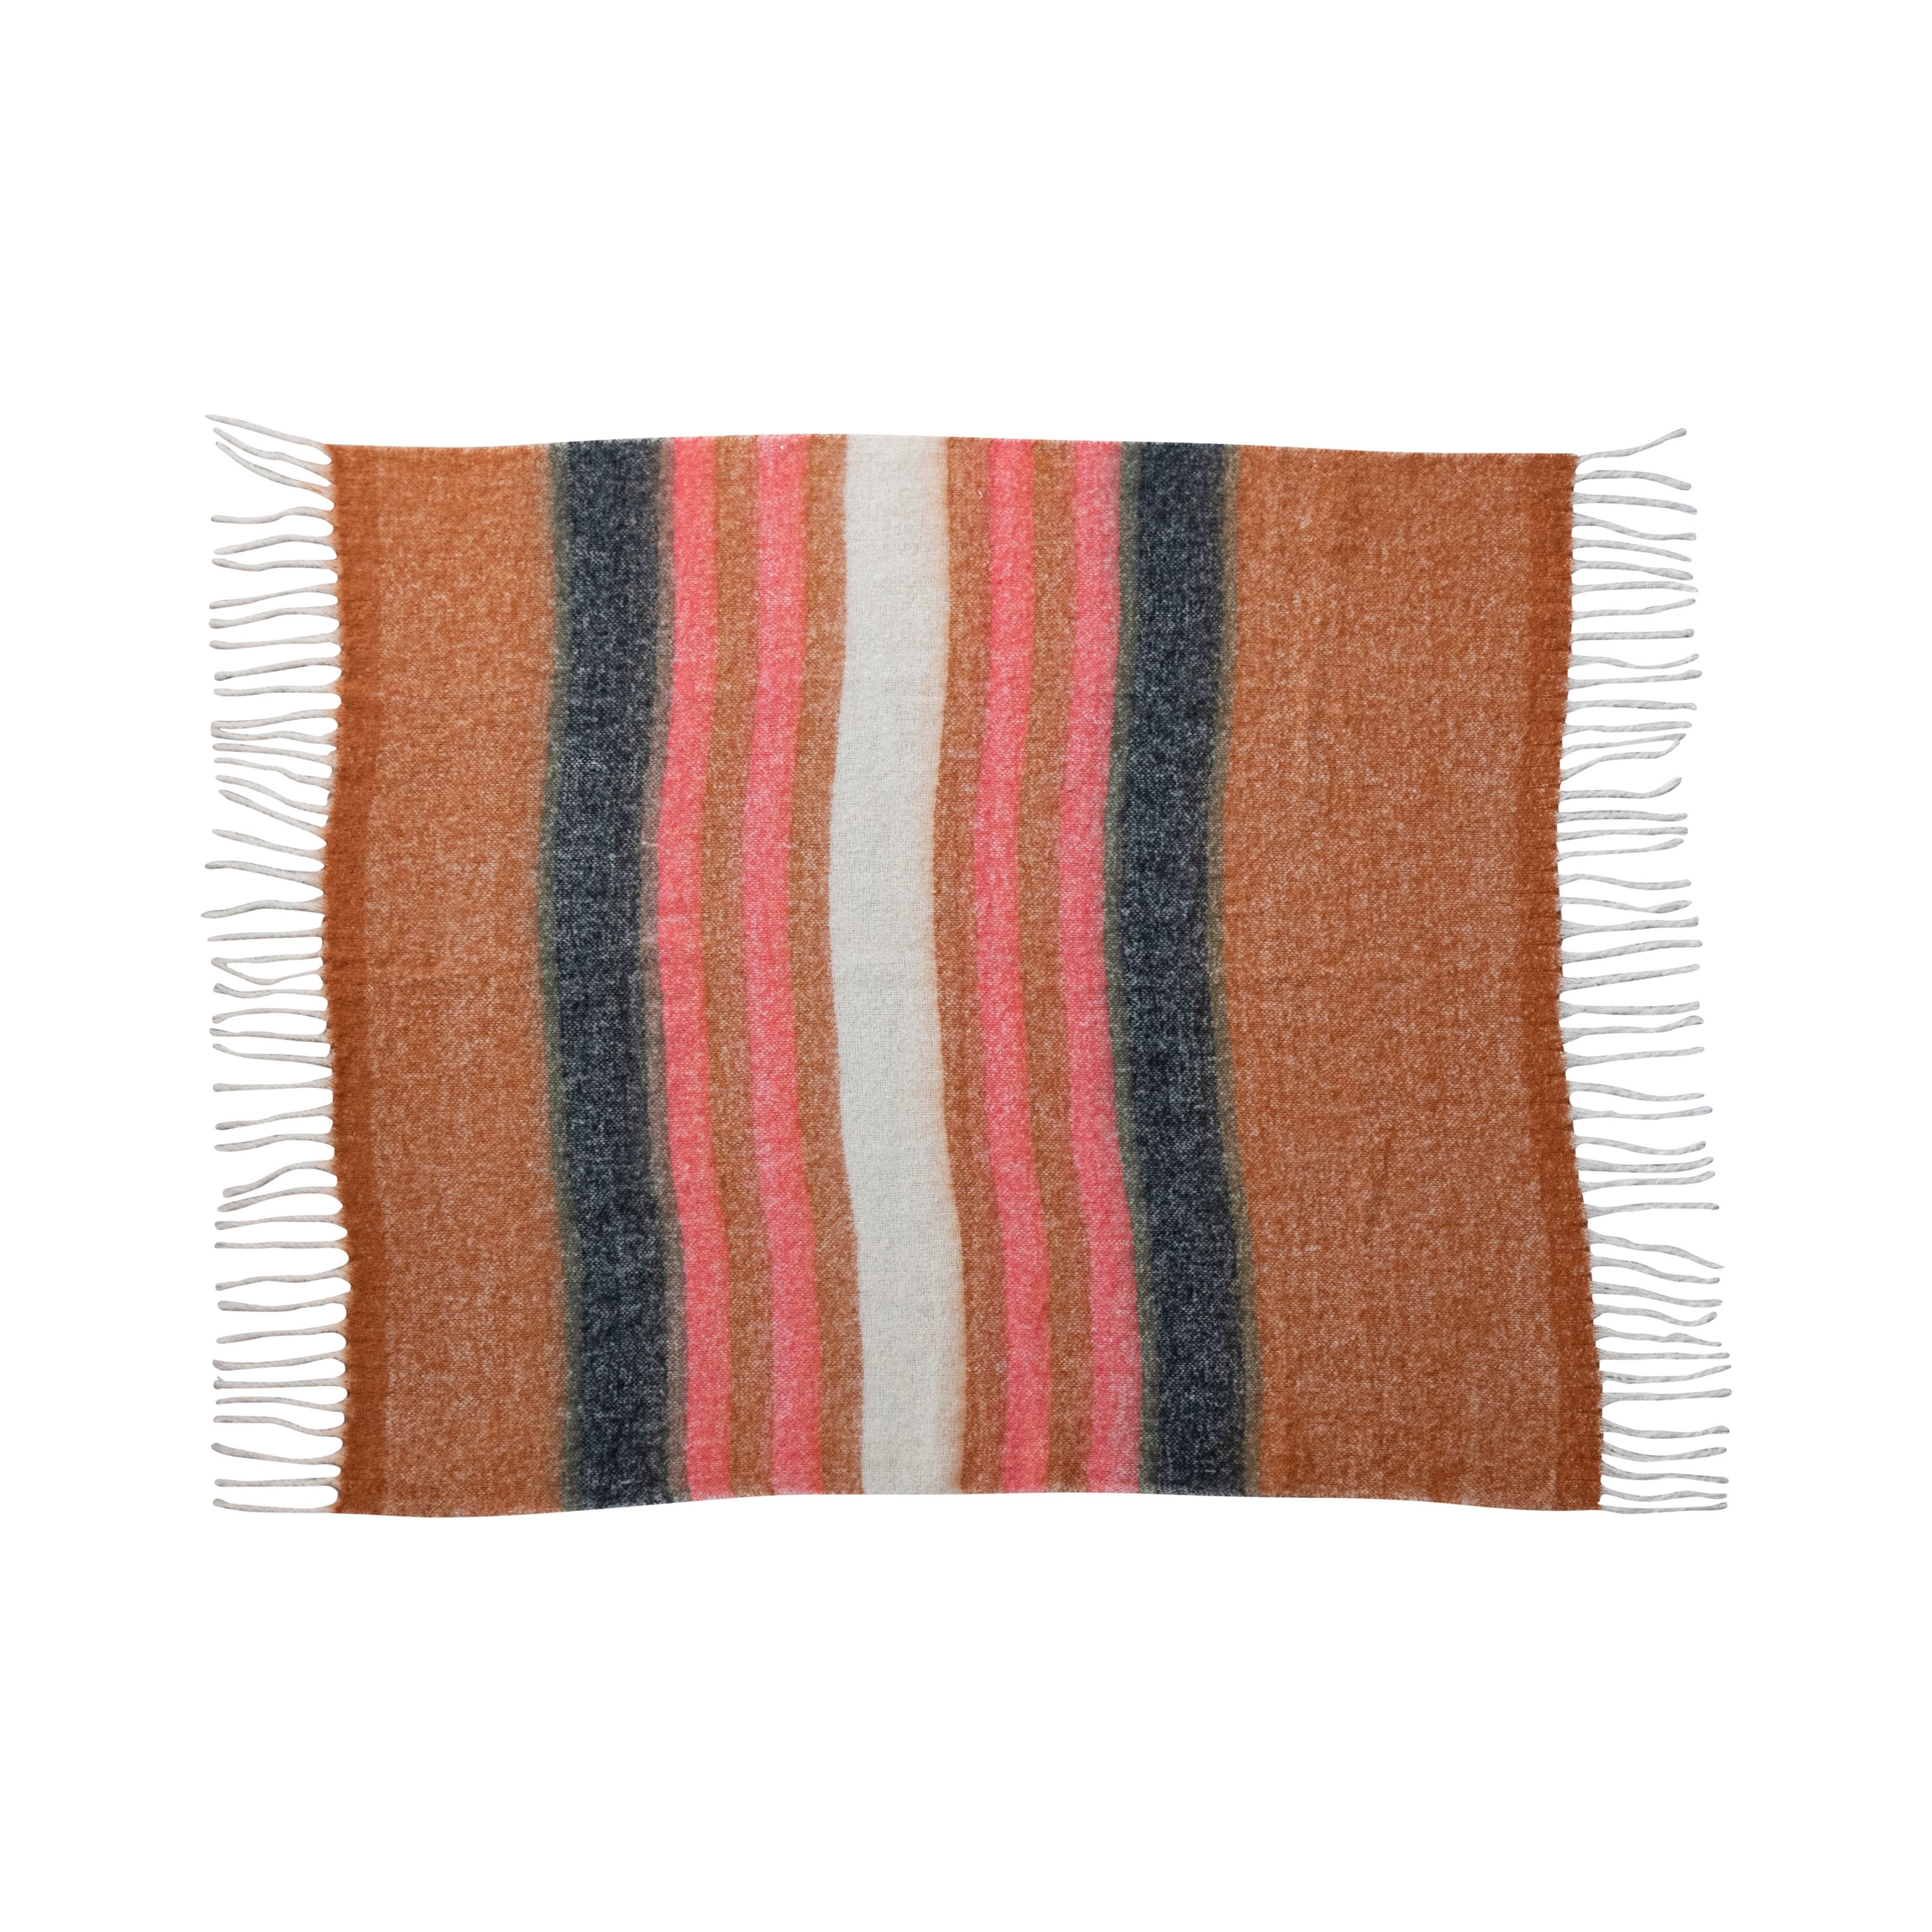 Striped Acrylic and Wool Throw Blanket, Brown and Pink - Image 0